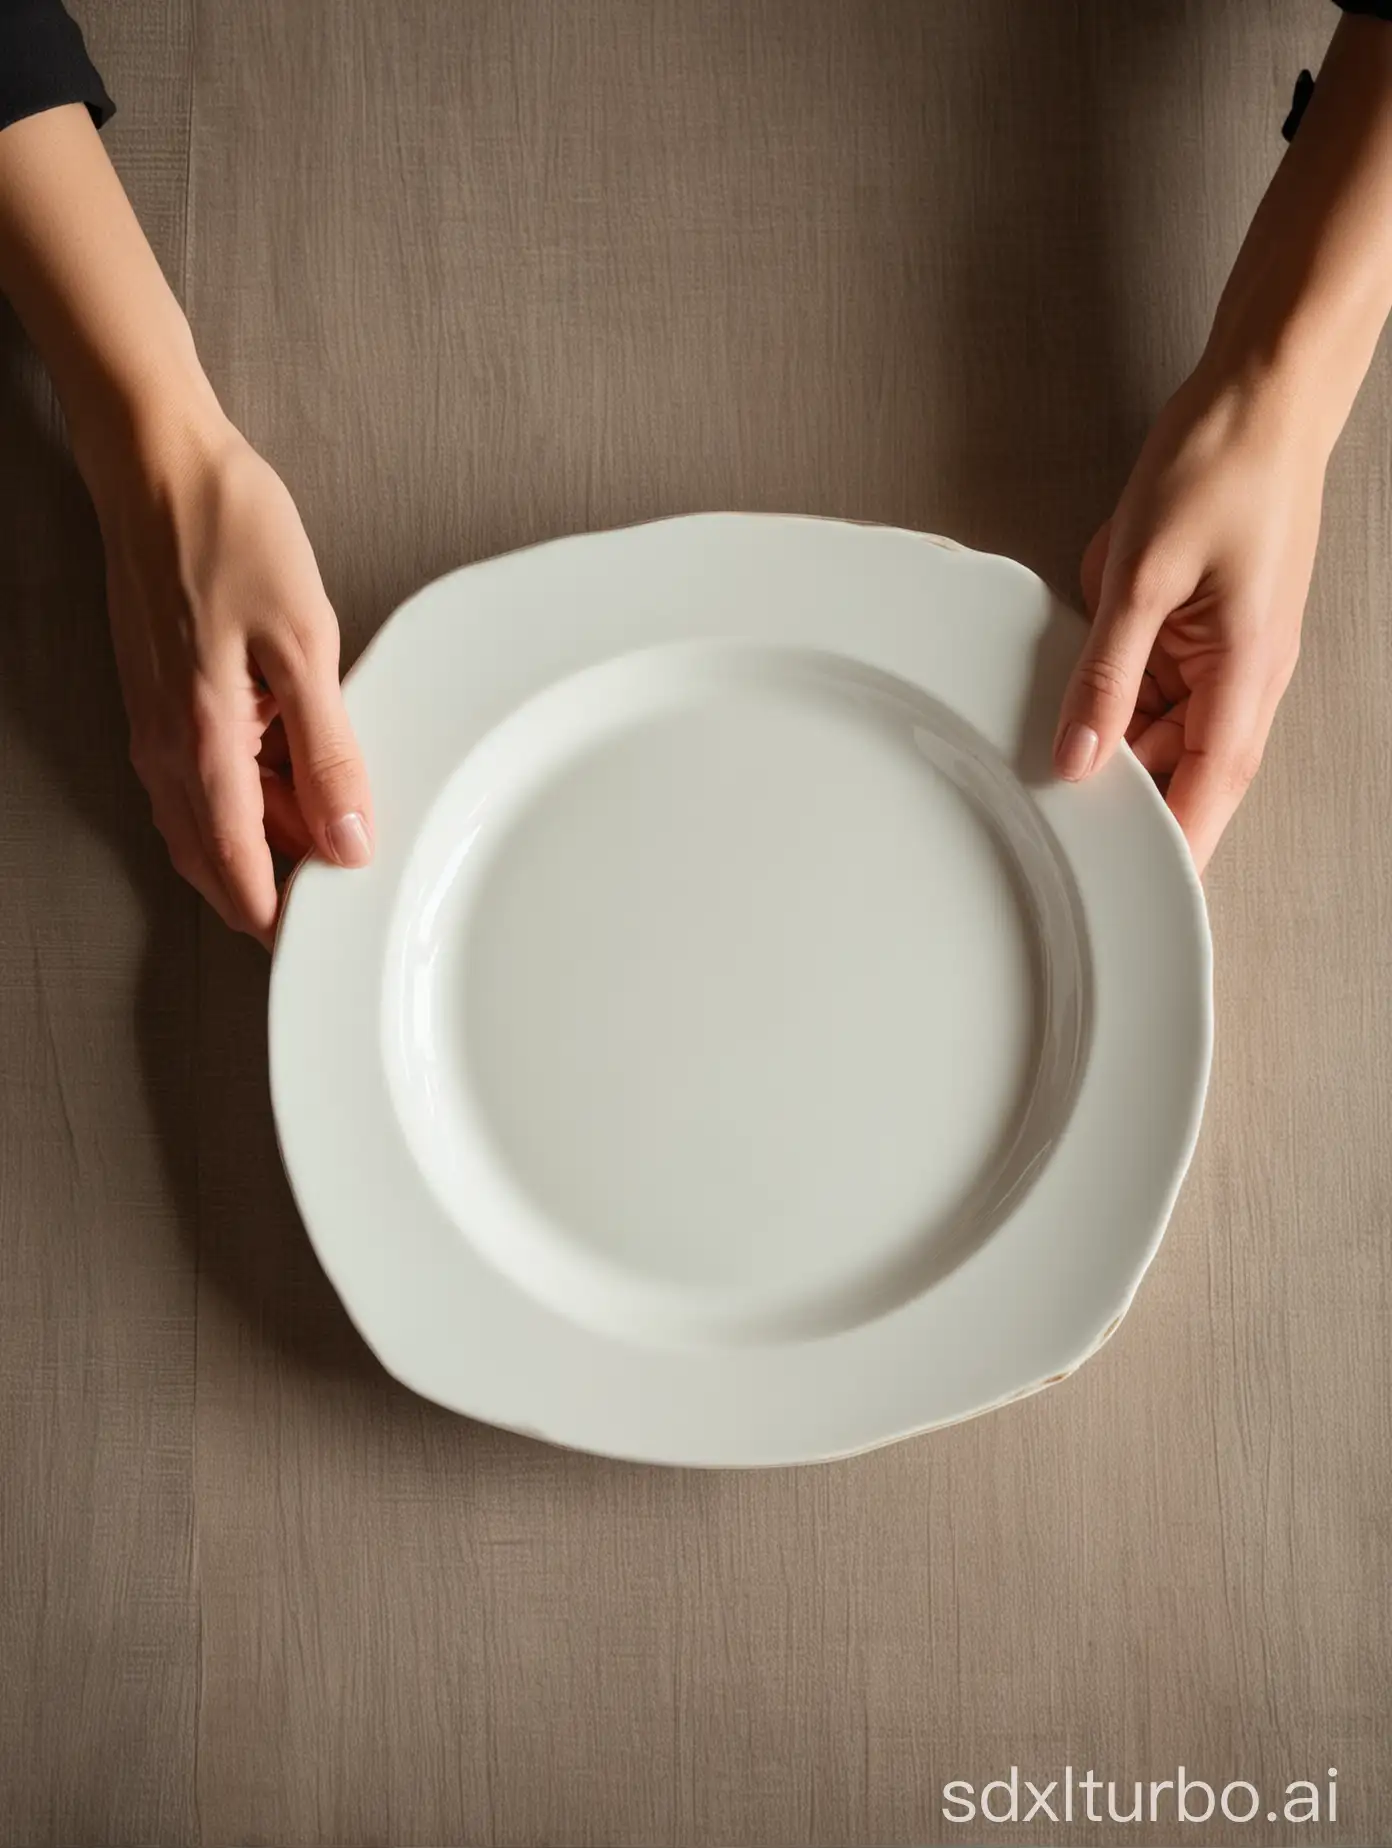 Womans-Hands-Holding-an-Empty-Plate-on-a-Table